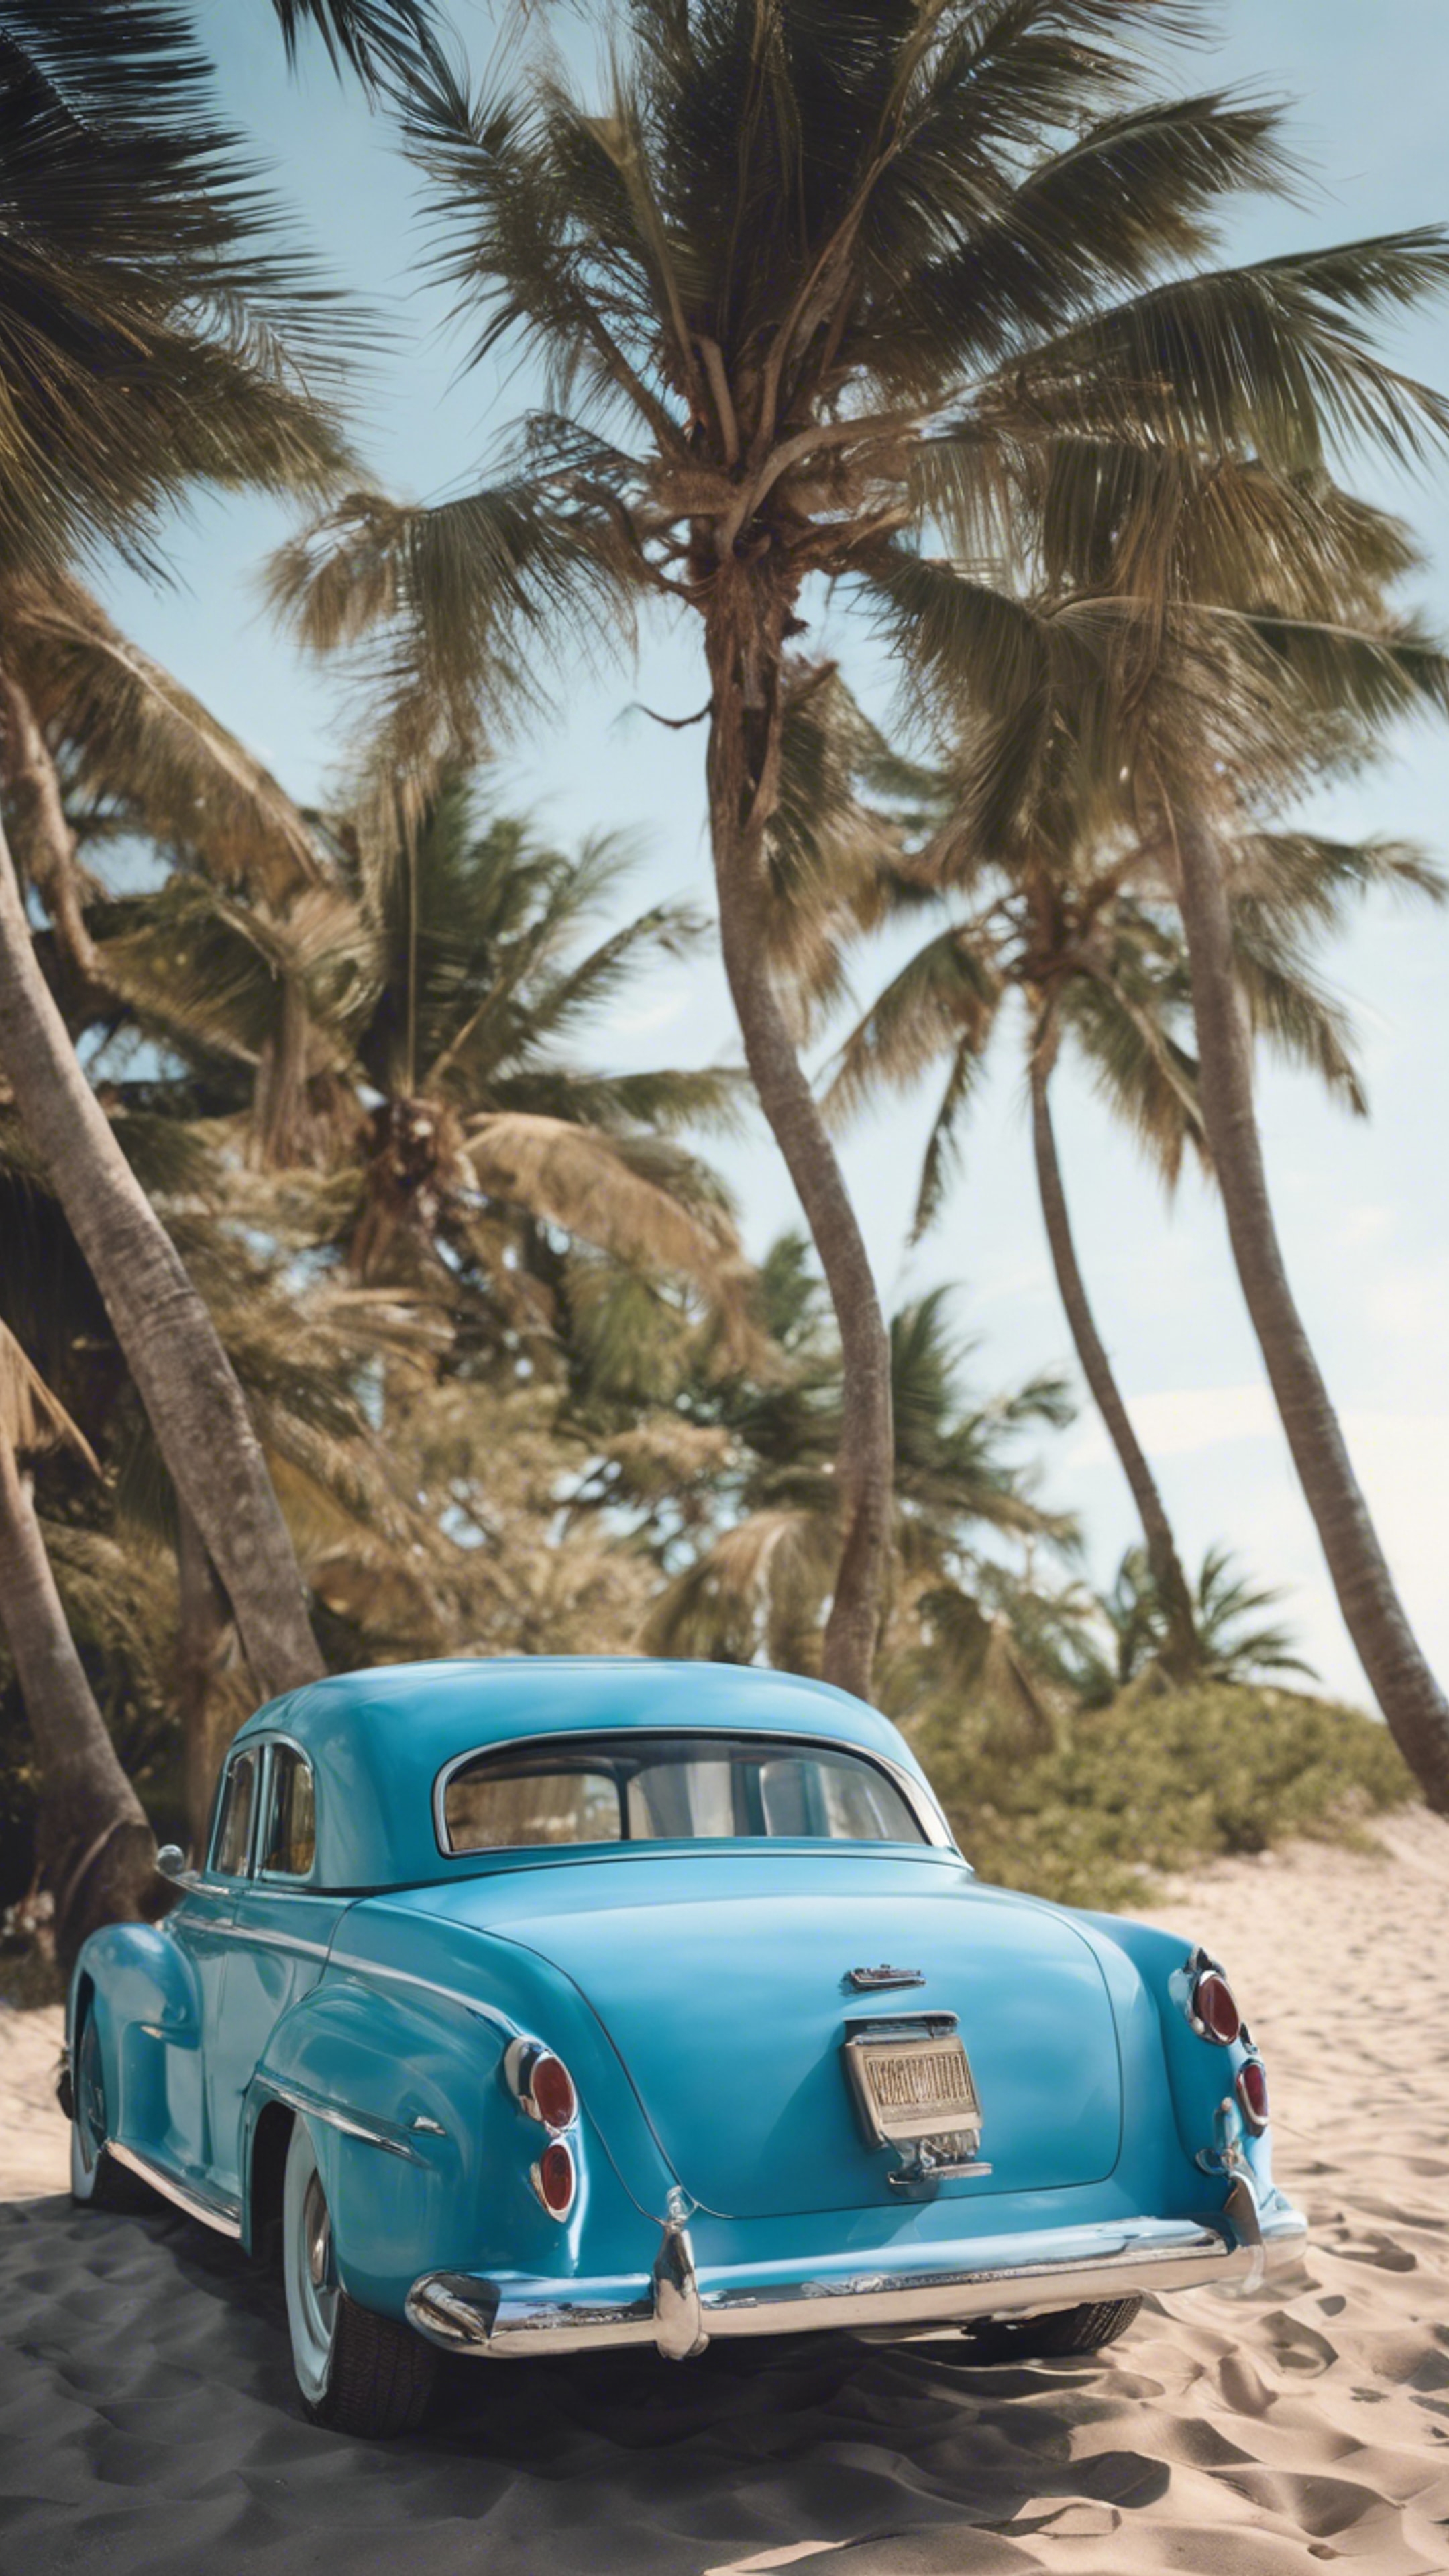 A vintage car painted in cool blue, parked by the beach วอลล์เปเปอร์[7559f4037ca44818afd1]